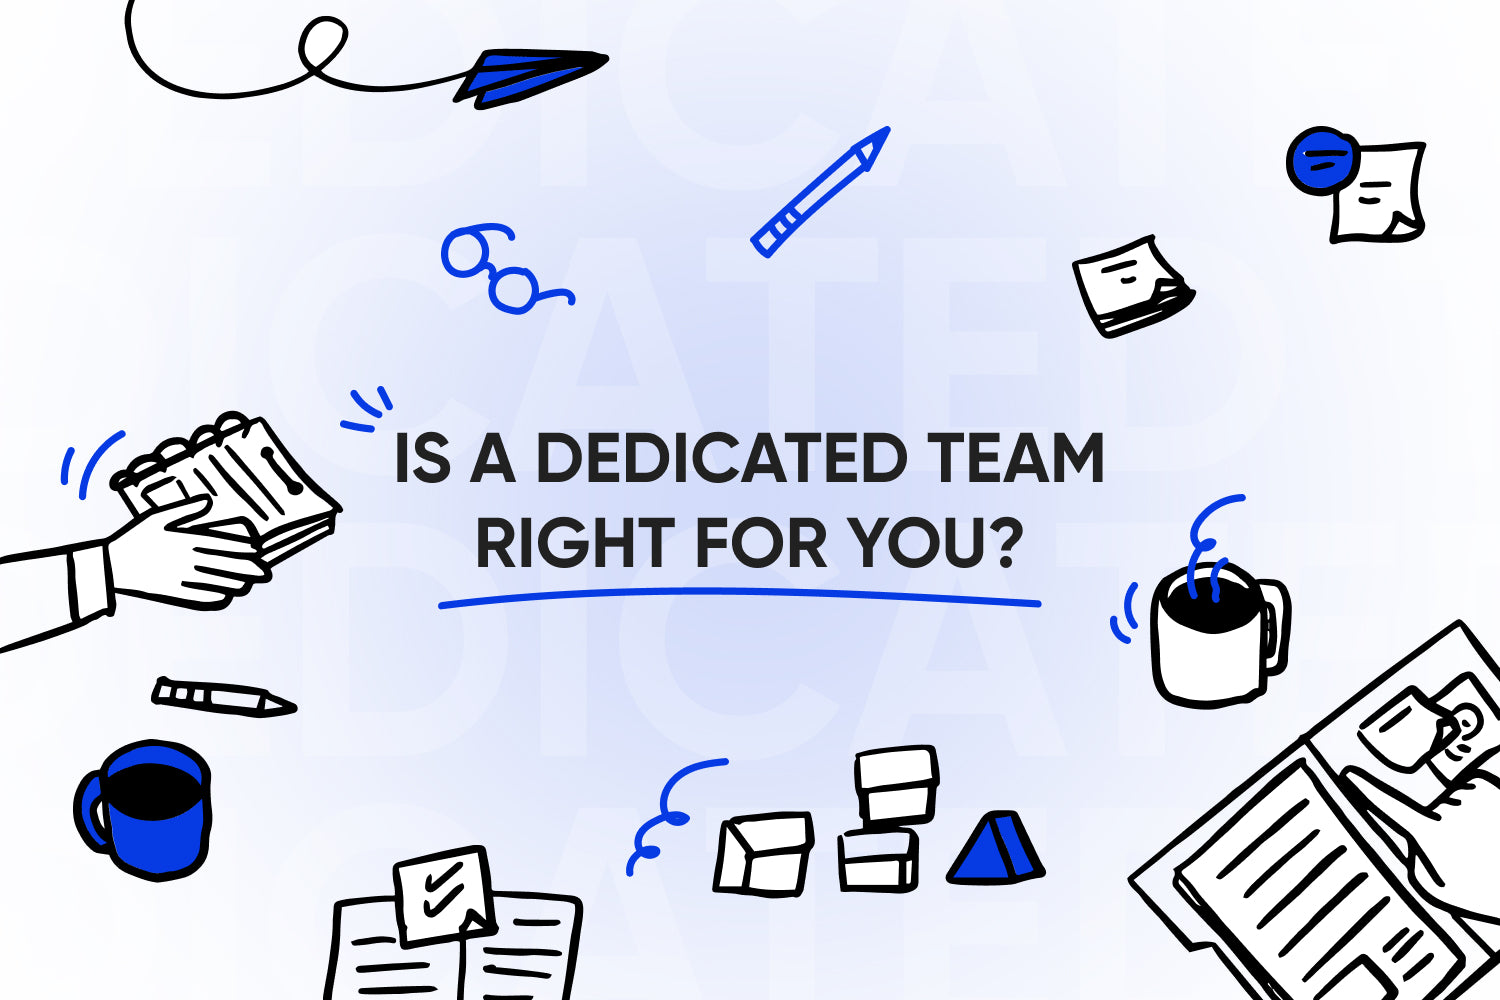 Is a Dedicated Team right for you?